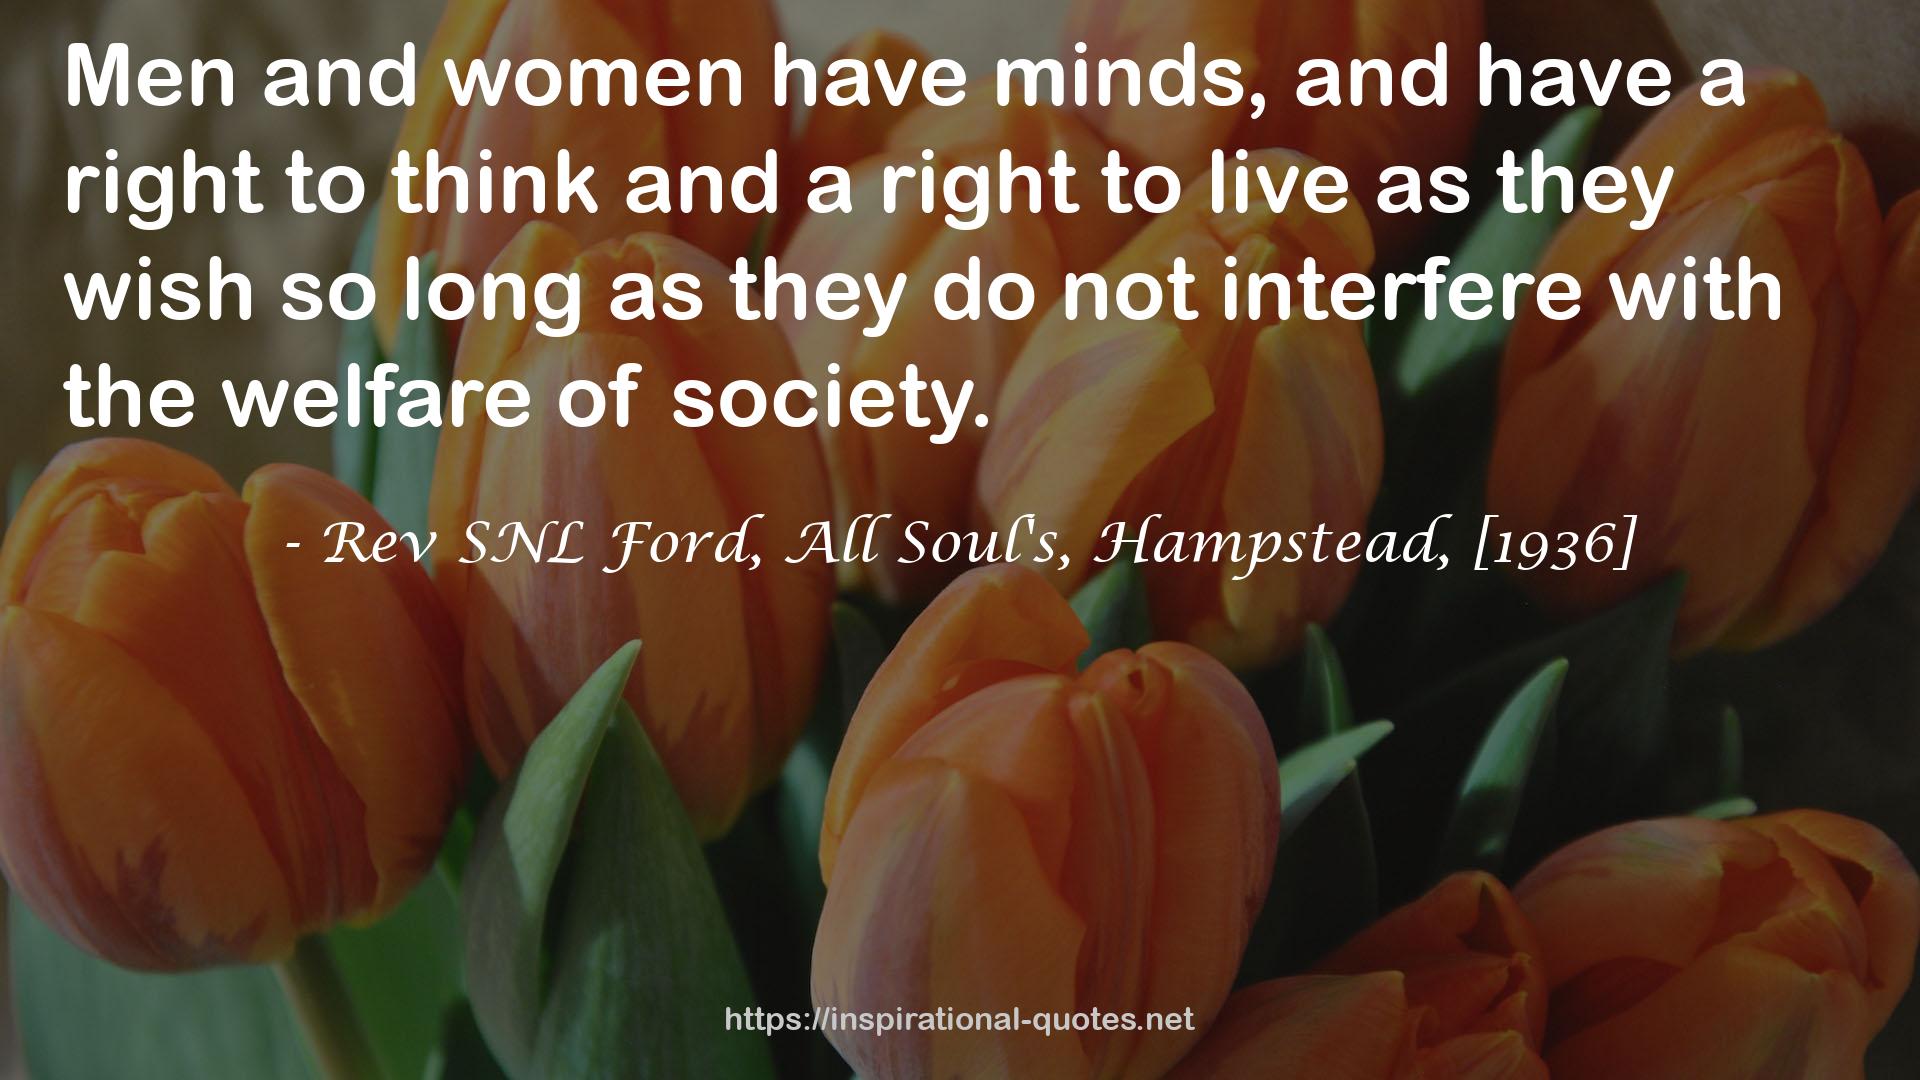 Rev SNL Ford, All Soul's, Hampstead, [1936] QUOTES